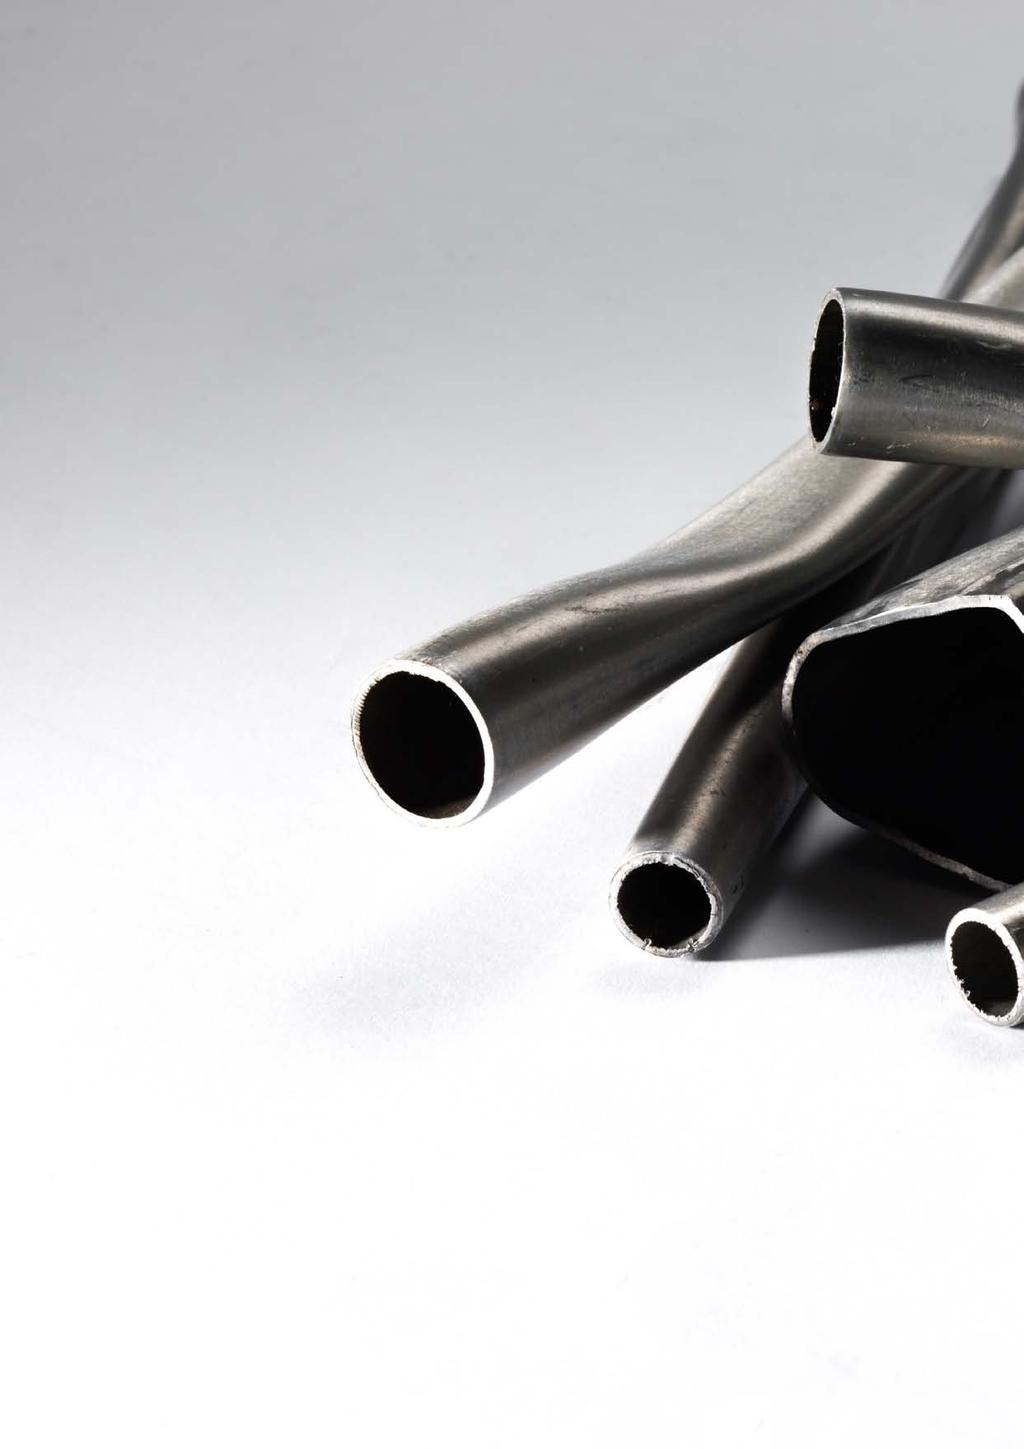 Dedacciai aluminum tubing constitute a large family of high performance products.